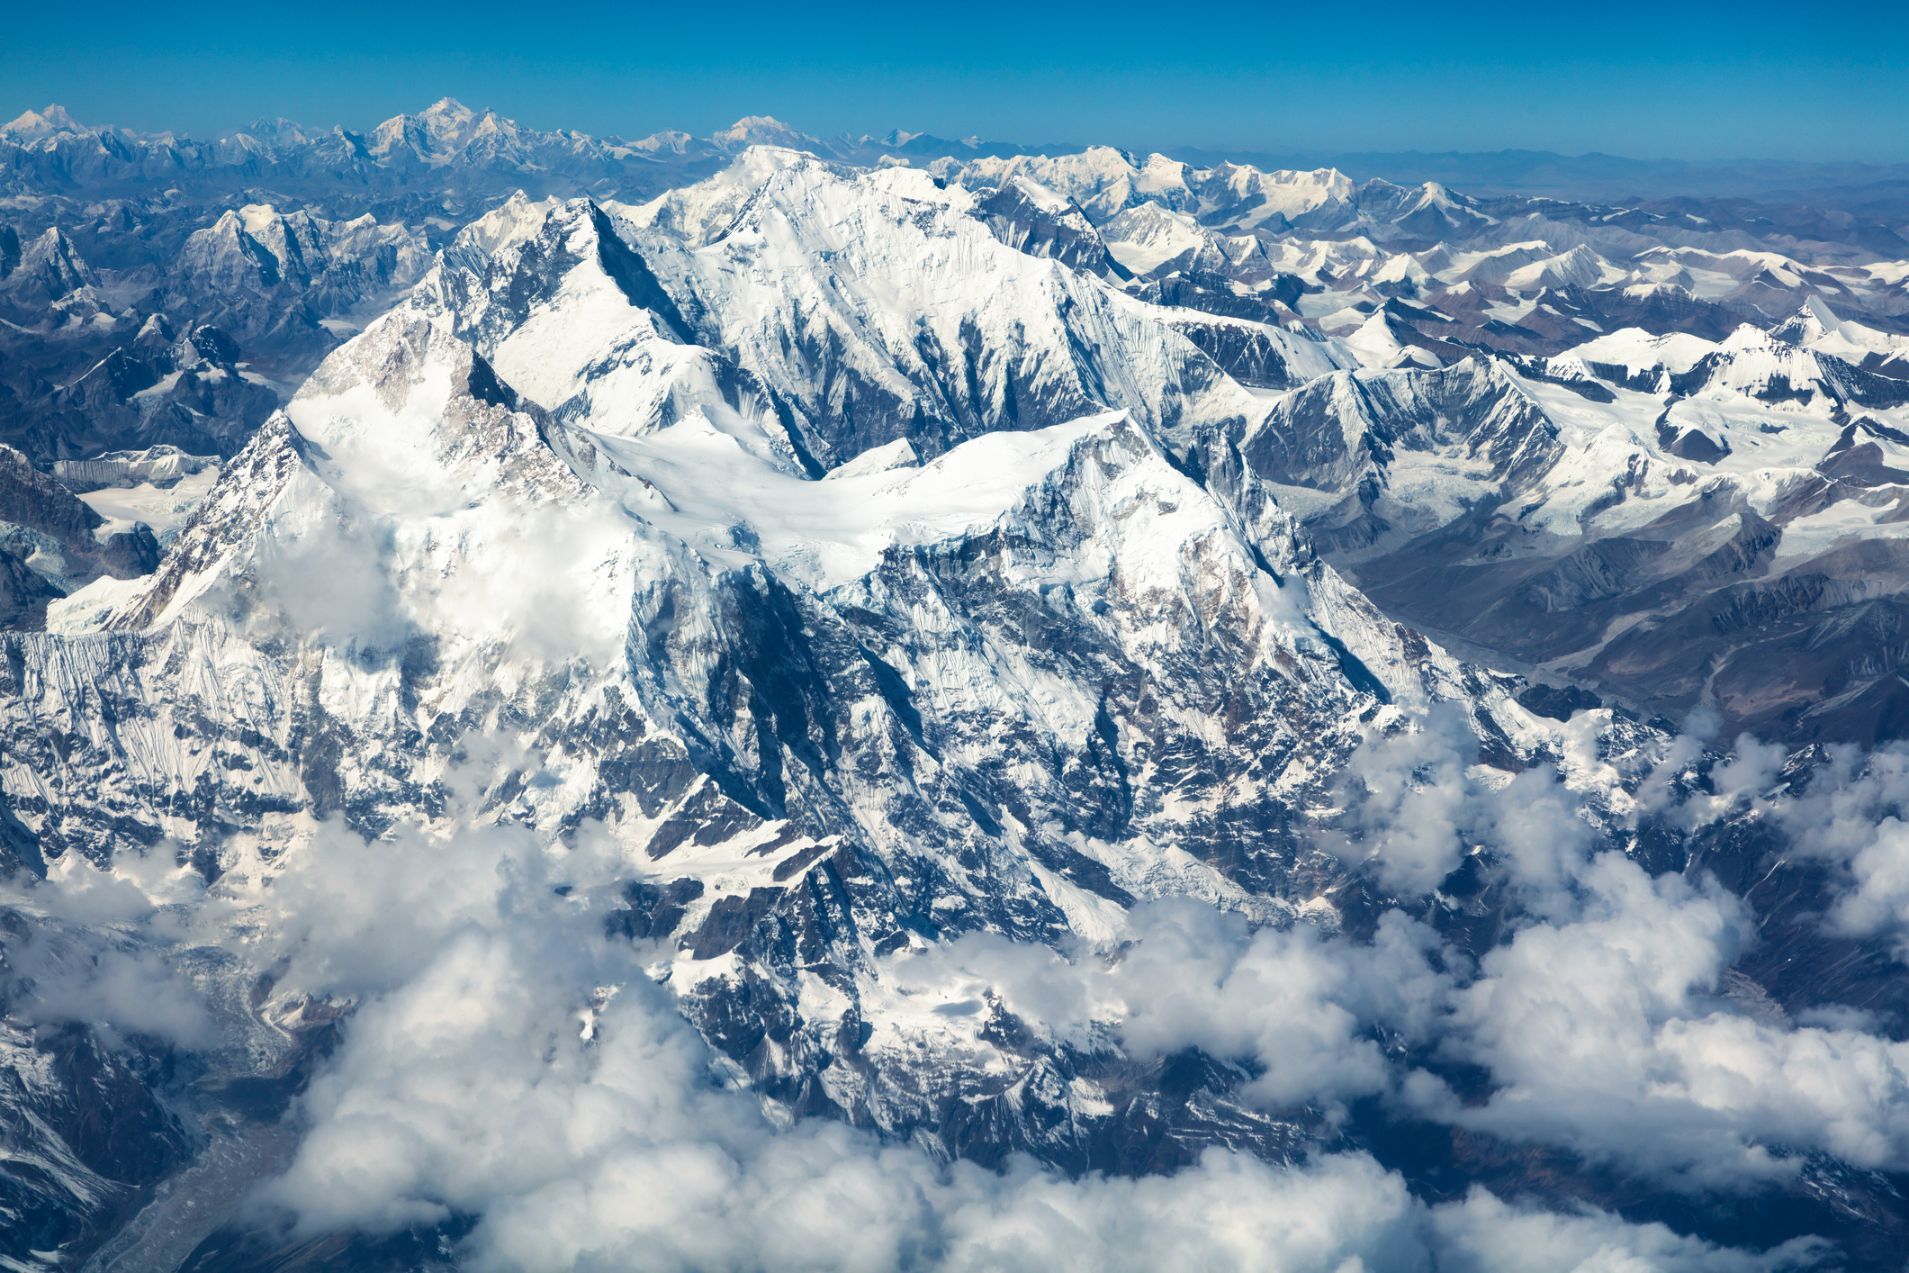 An aerial shot of Mount Everest and the neighbouring mountains in the might Himalayas of Nepal.